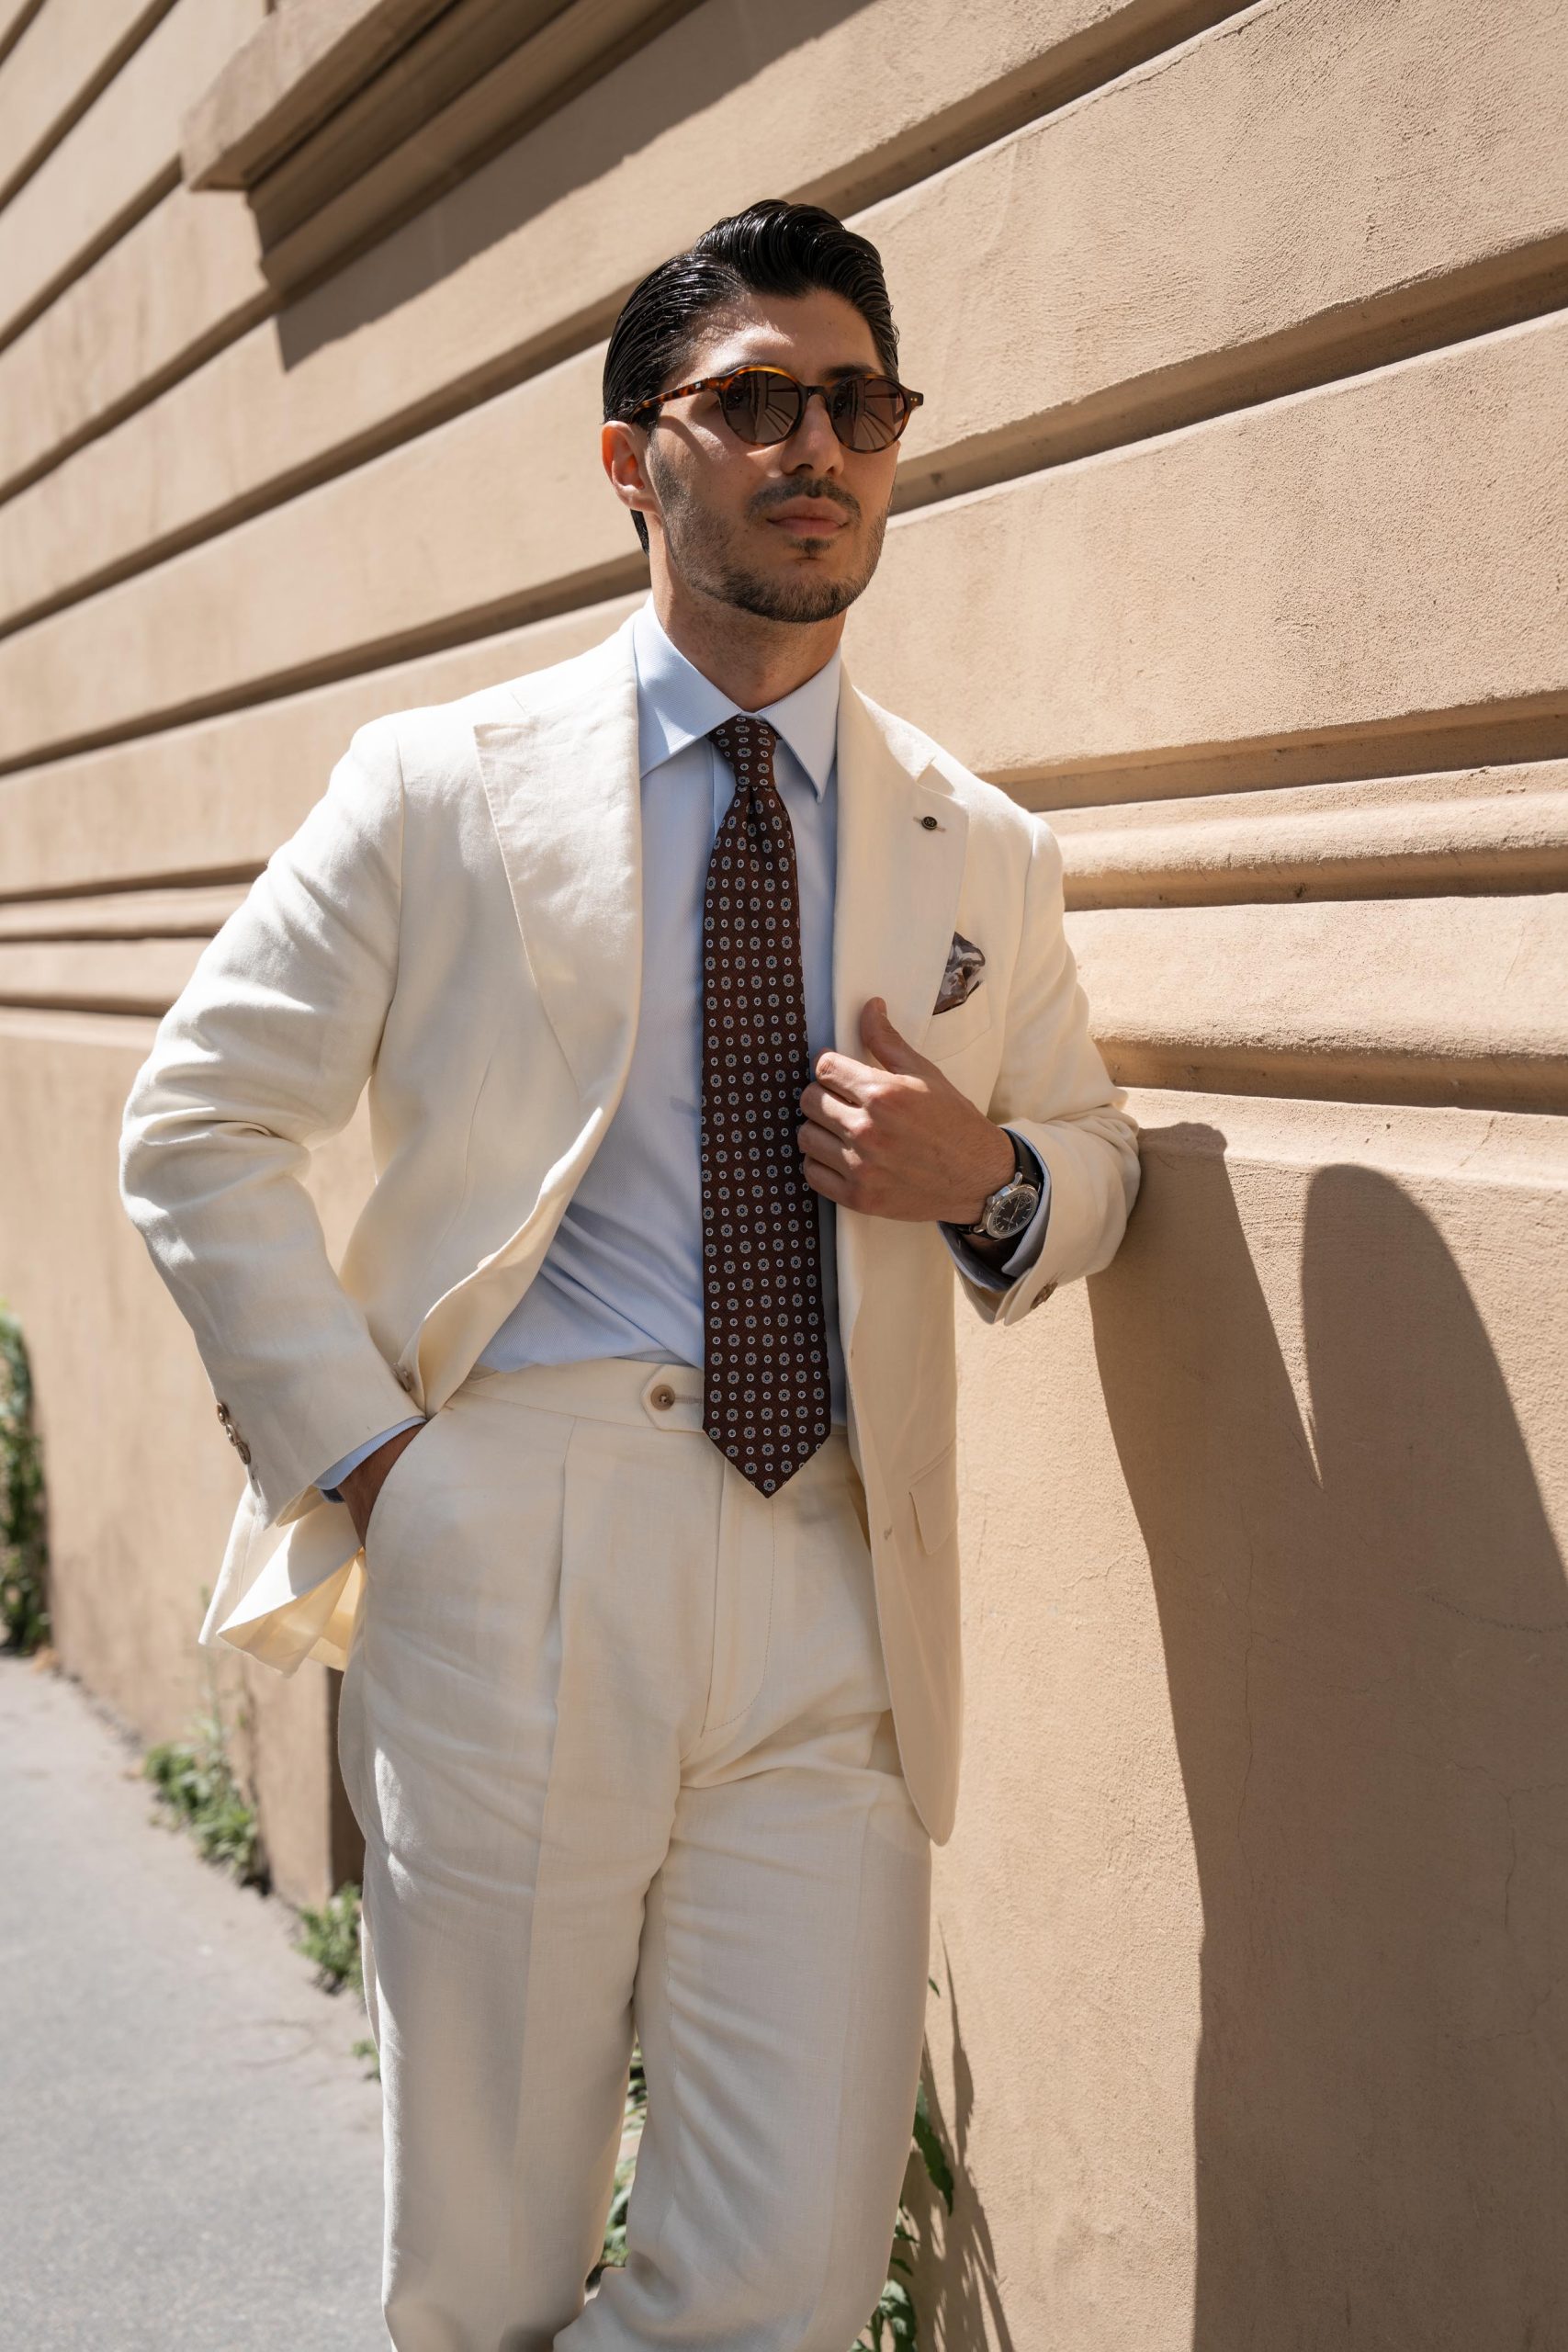 Pitti Uomo off-white suit worn by Okan, made by Mond